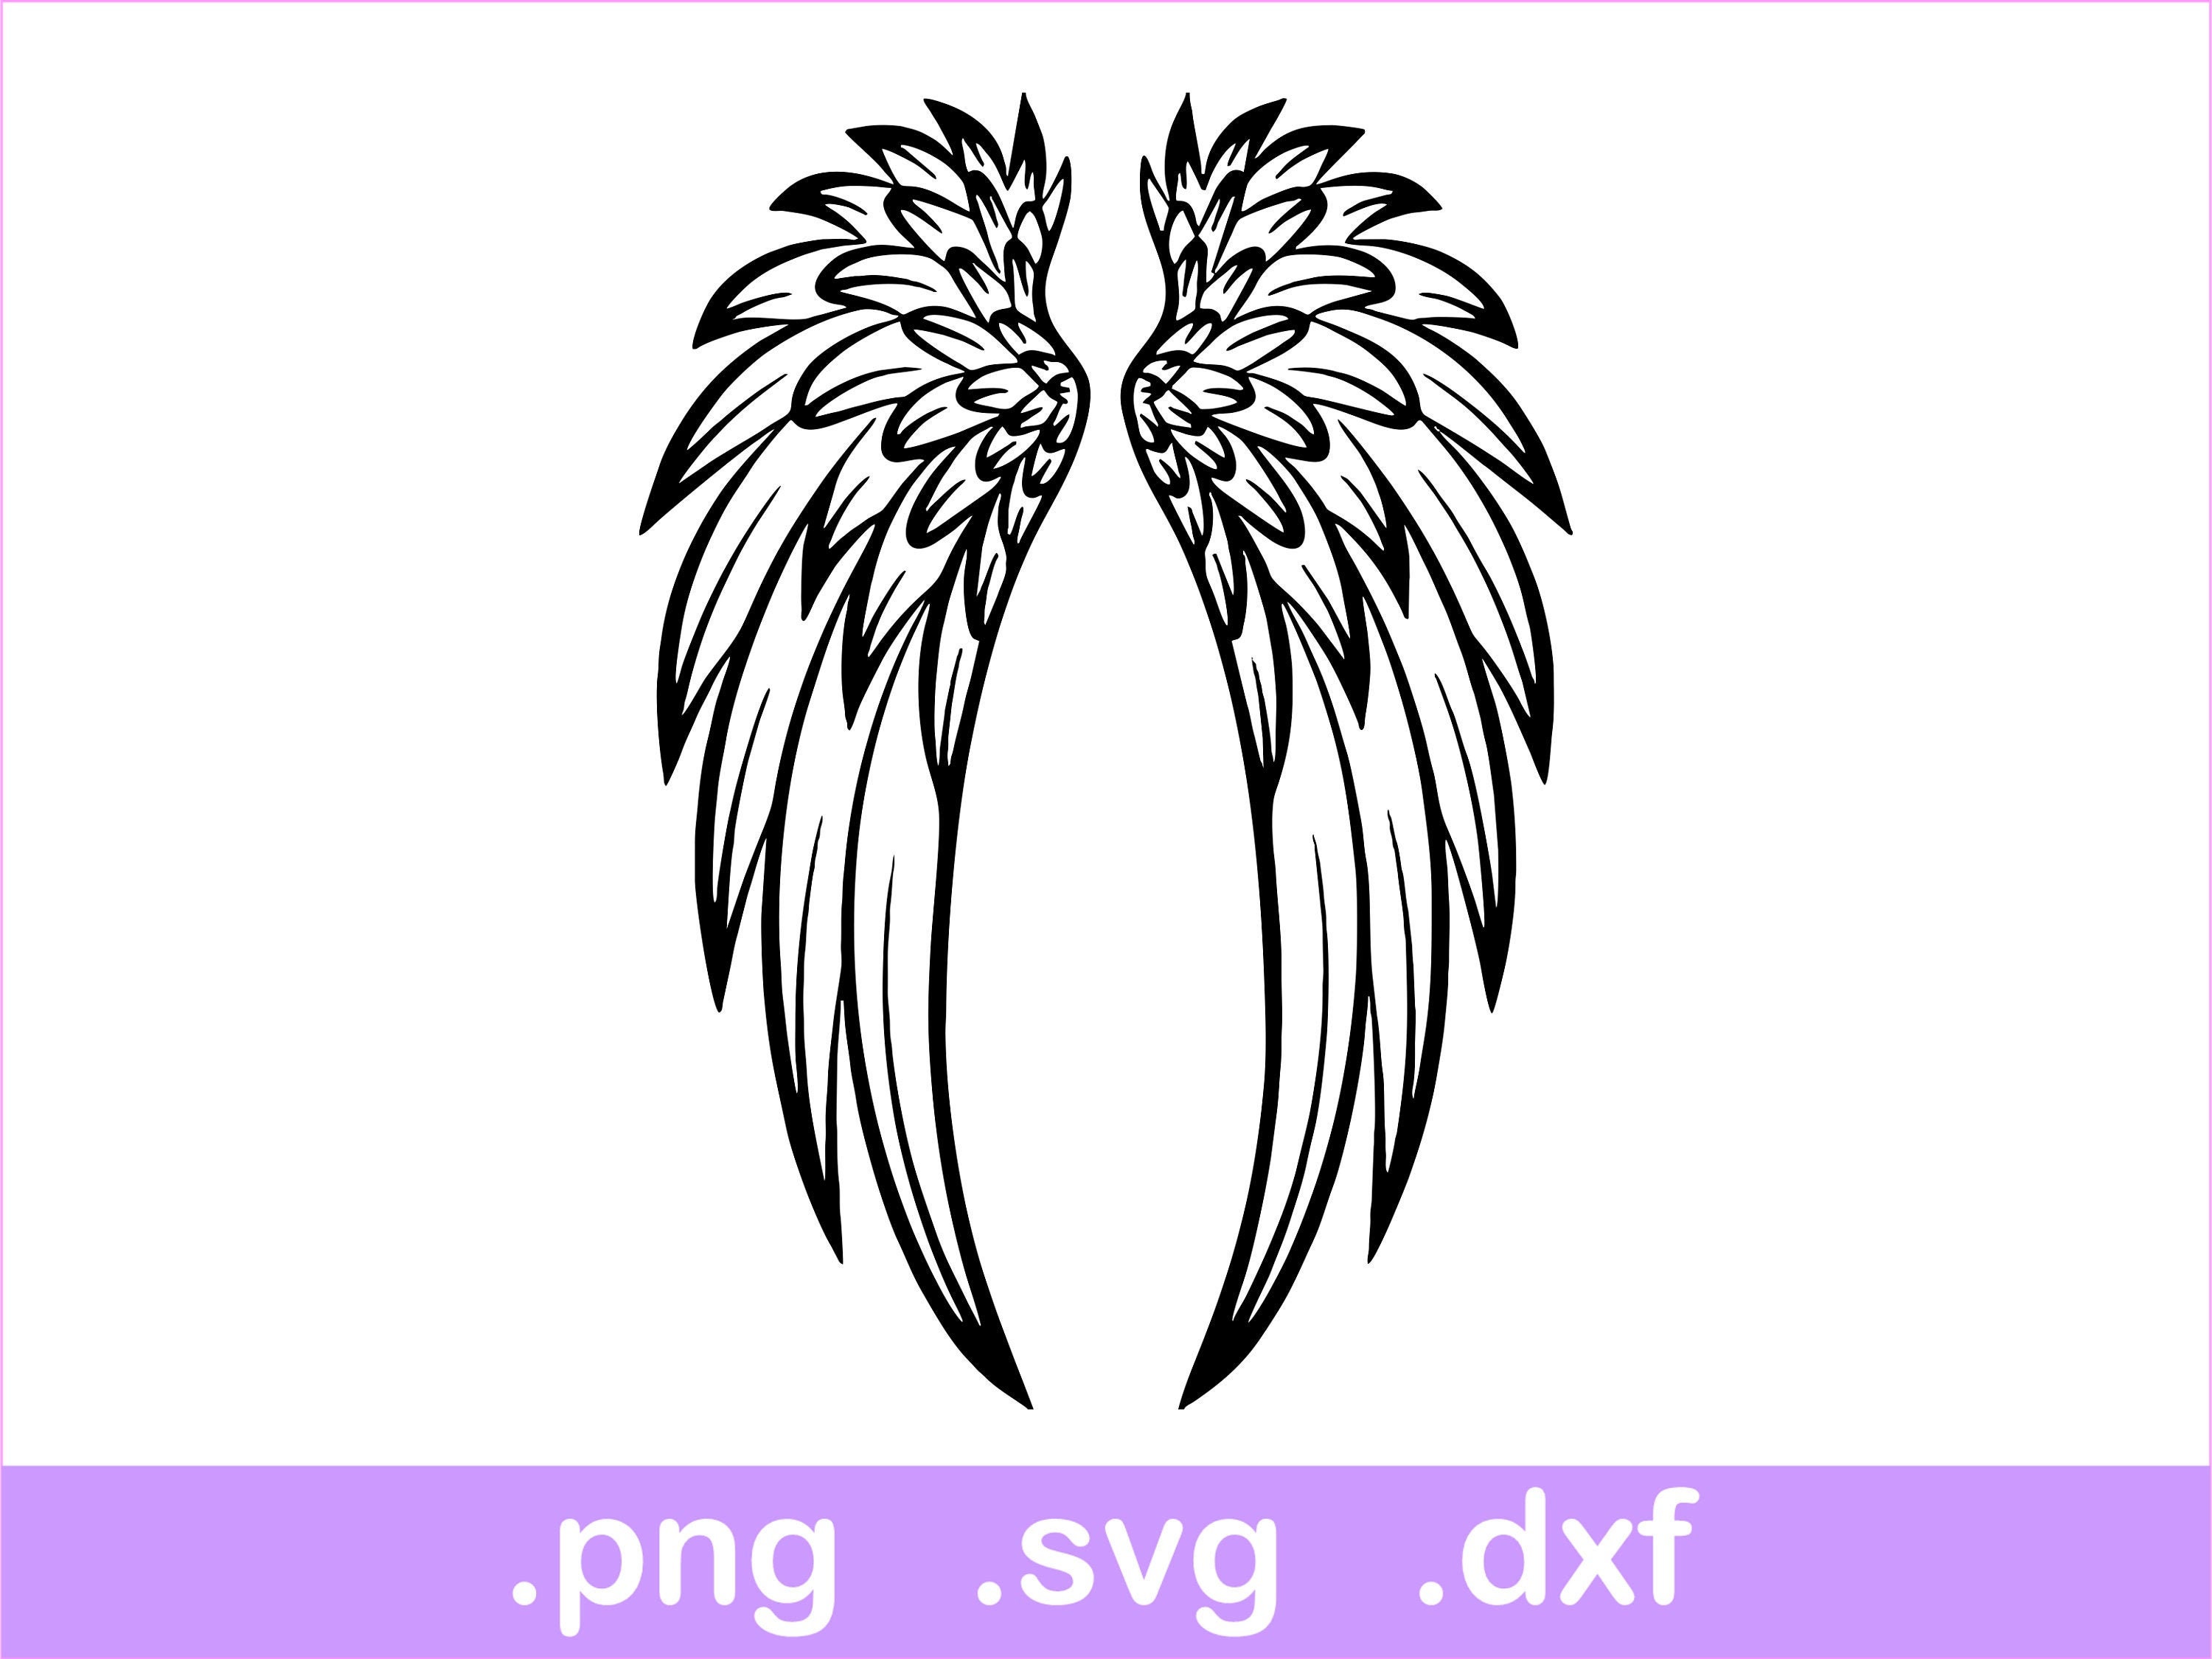 Svg Angel Wings Angel Svg Wings Svg Angel Dxf Png Etsy 